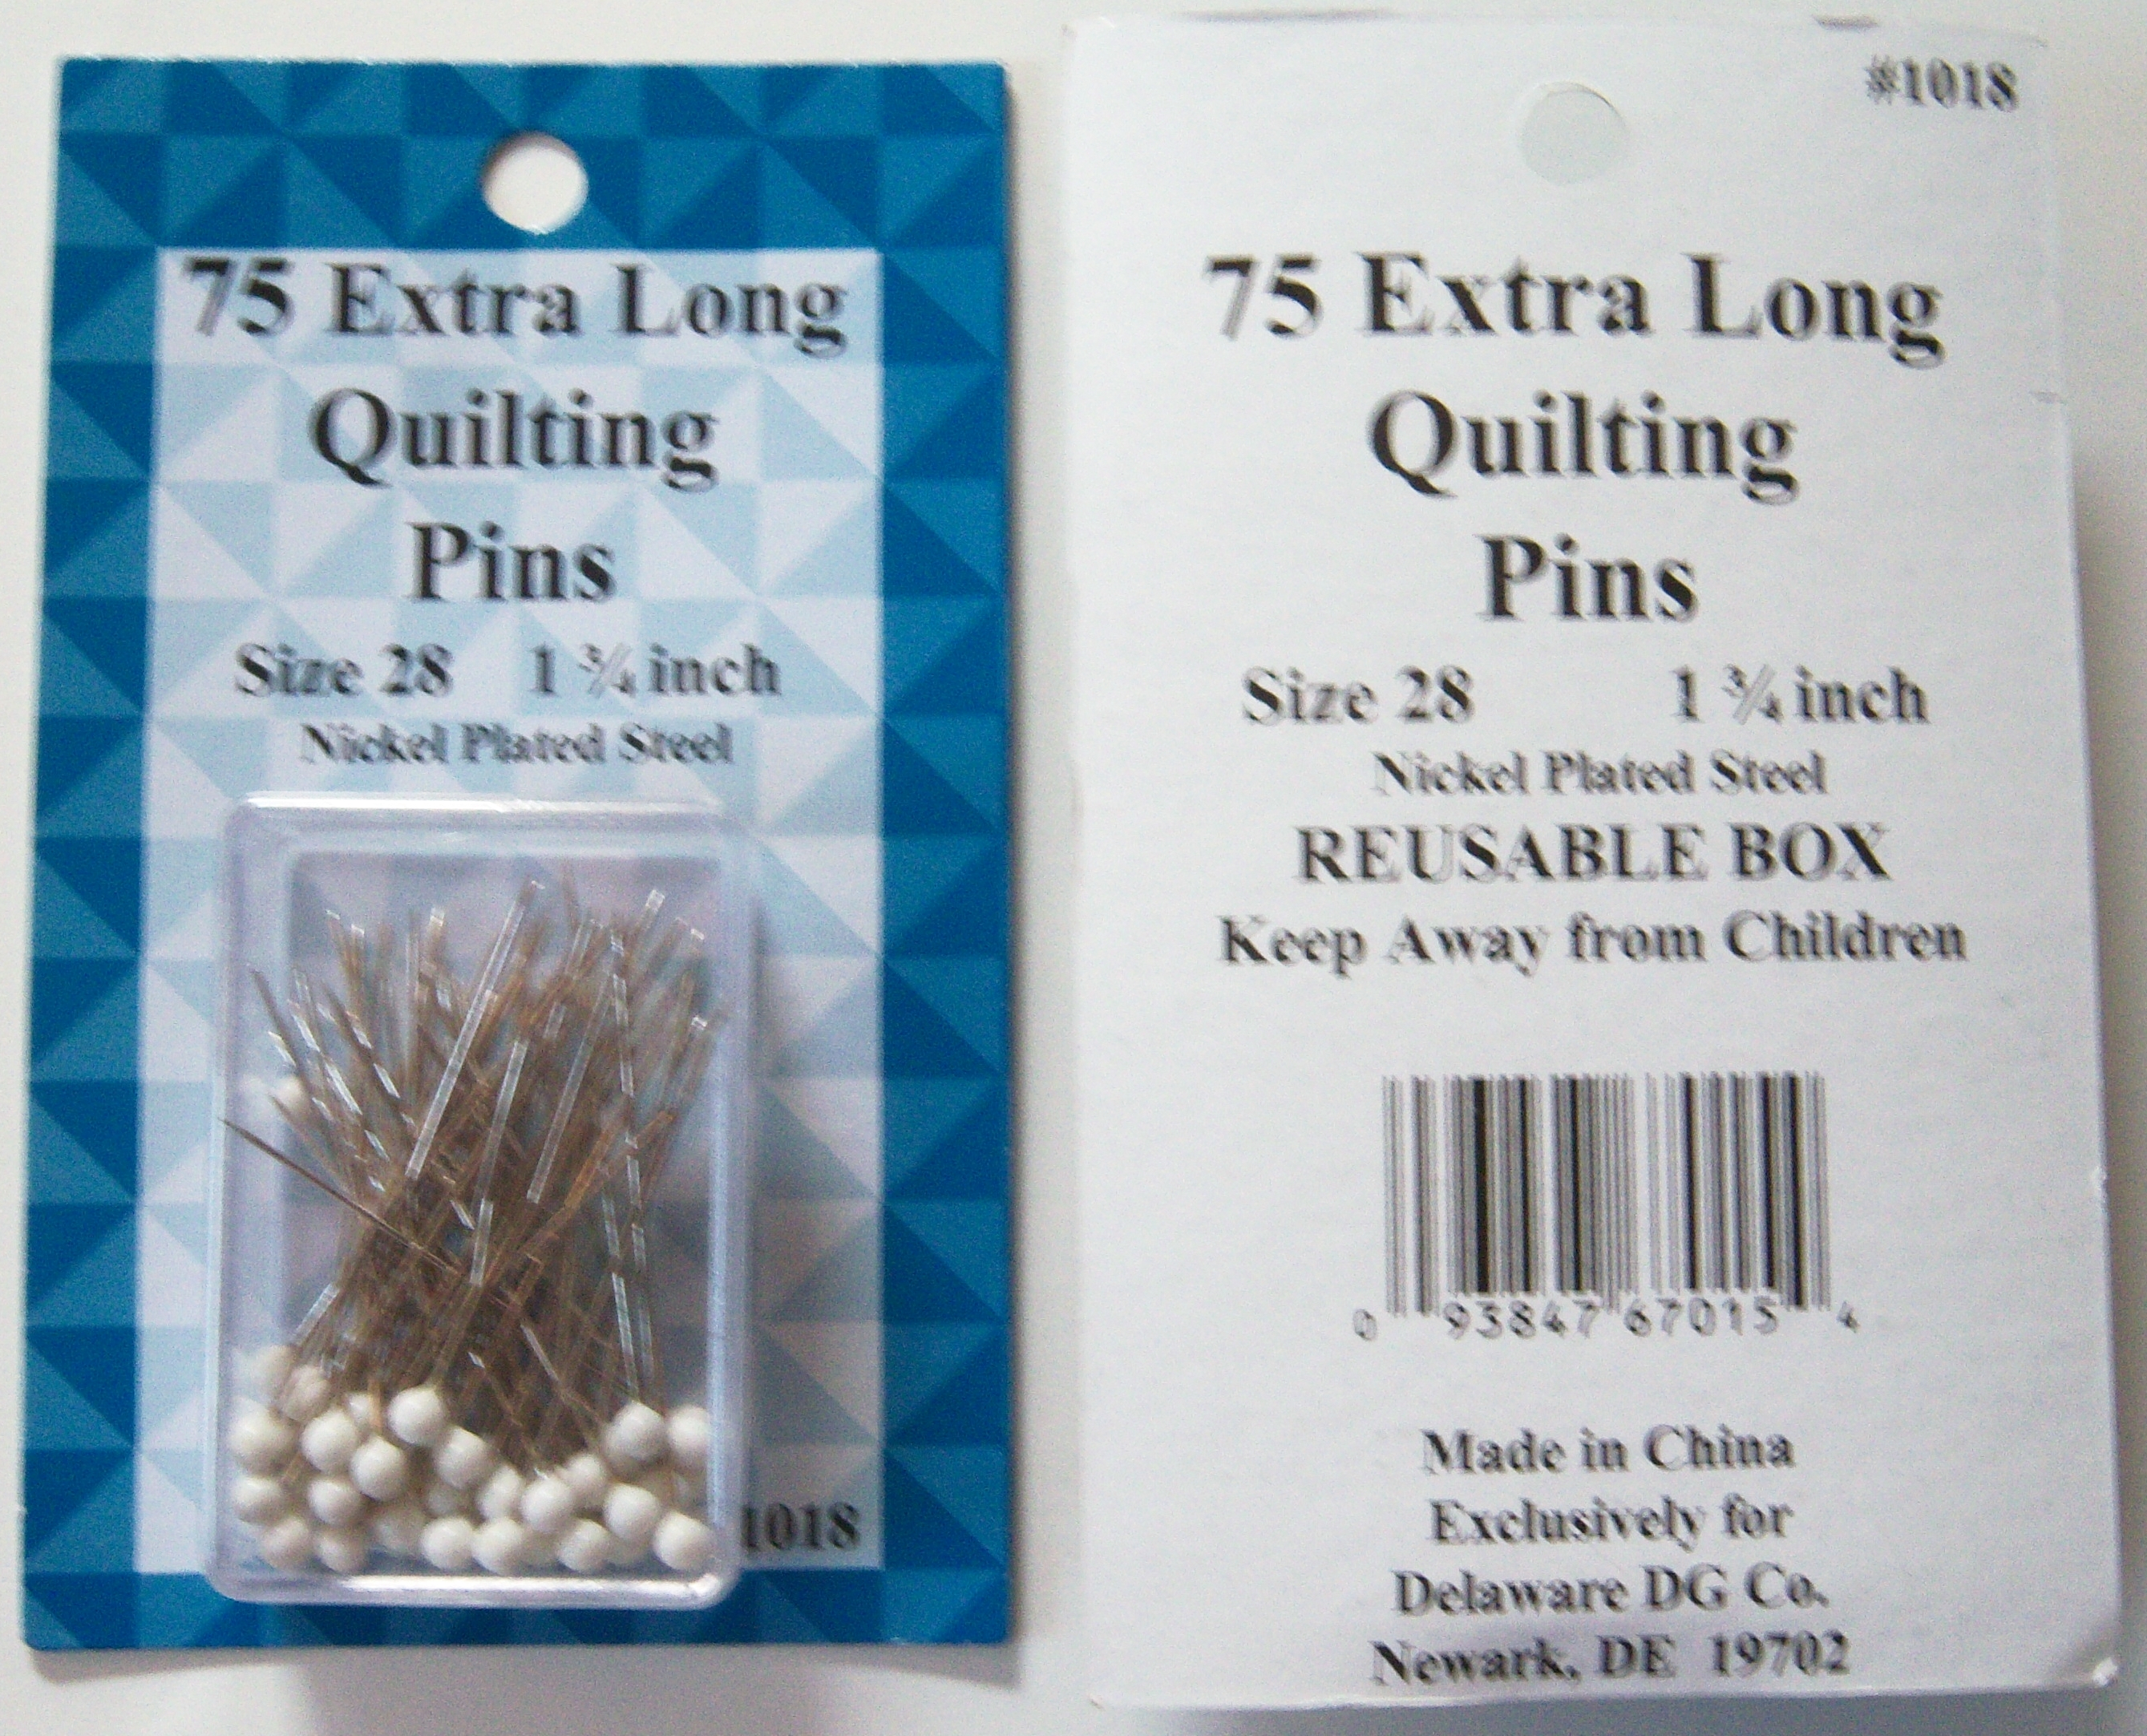 1018 75 Extra Long Quilting Pins 1 3/4